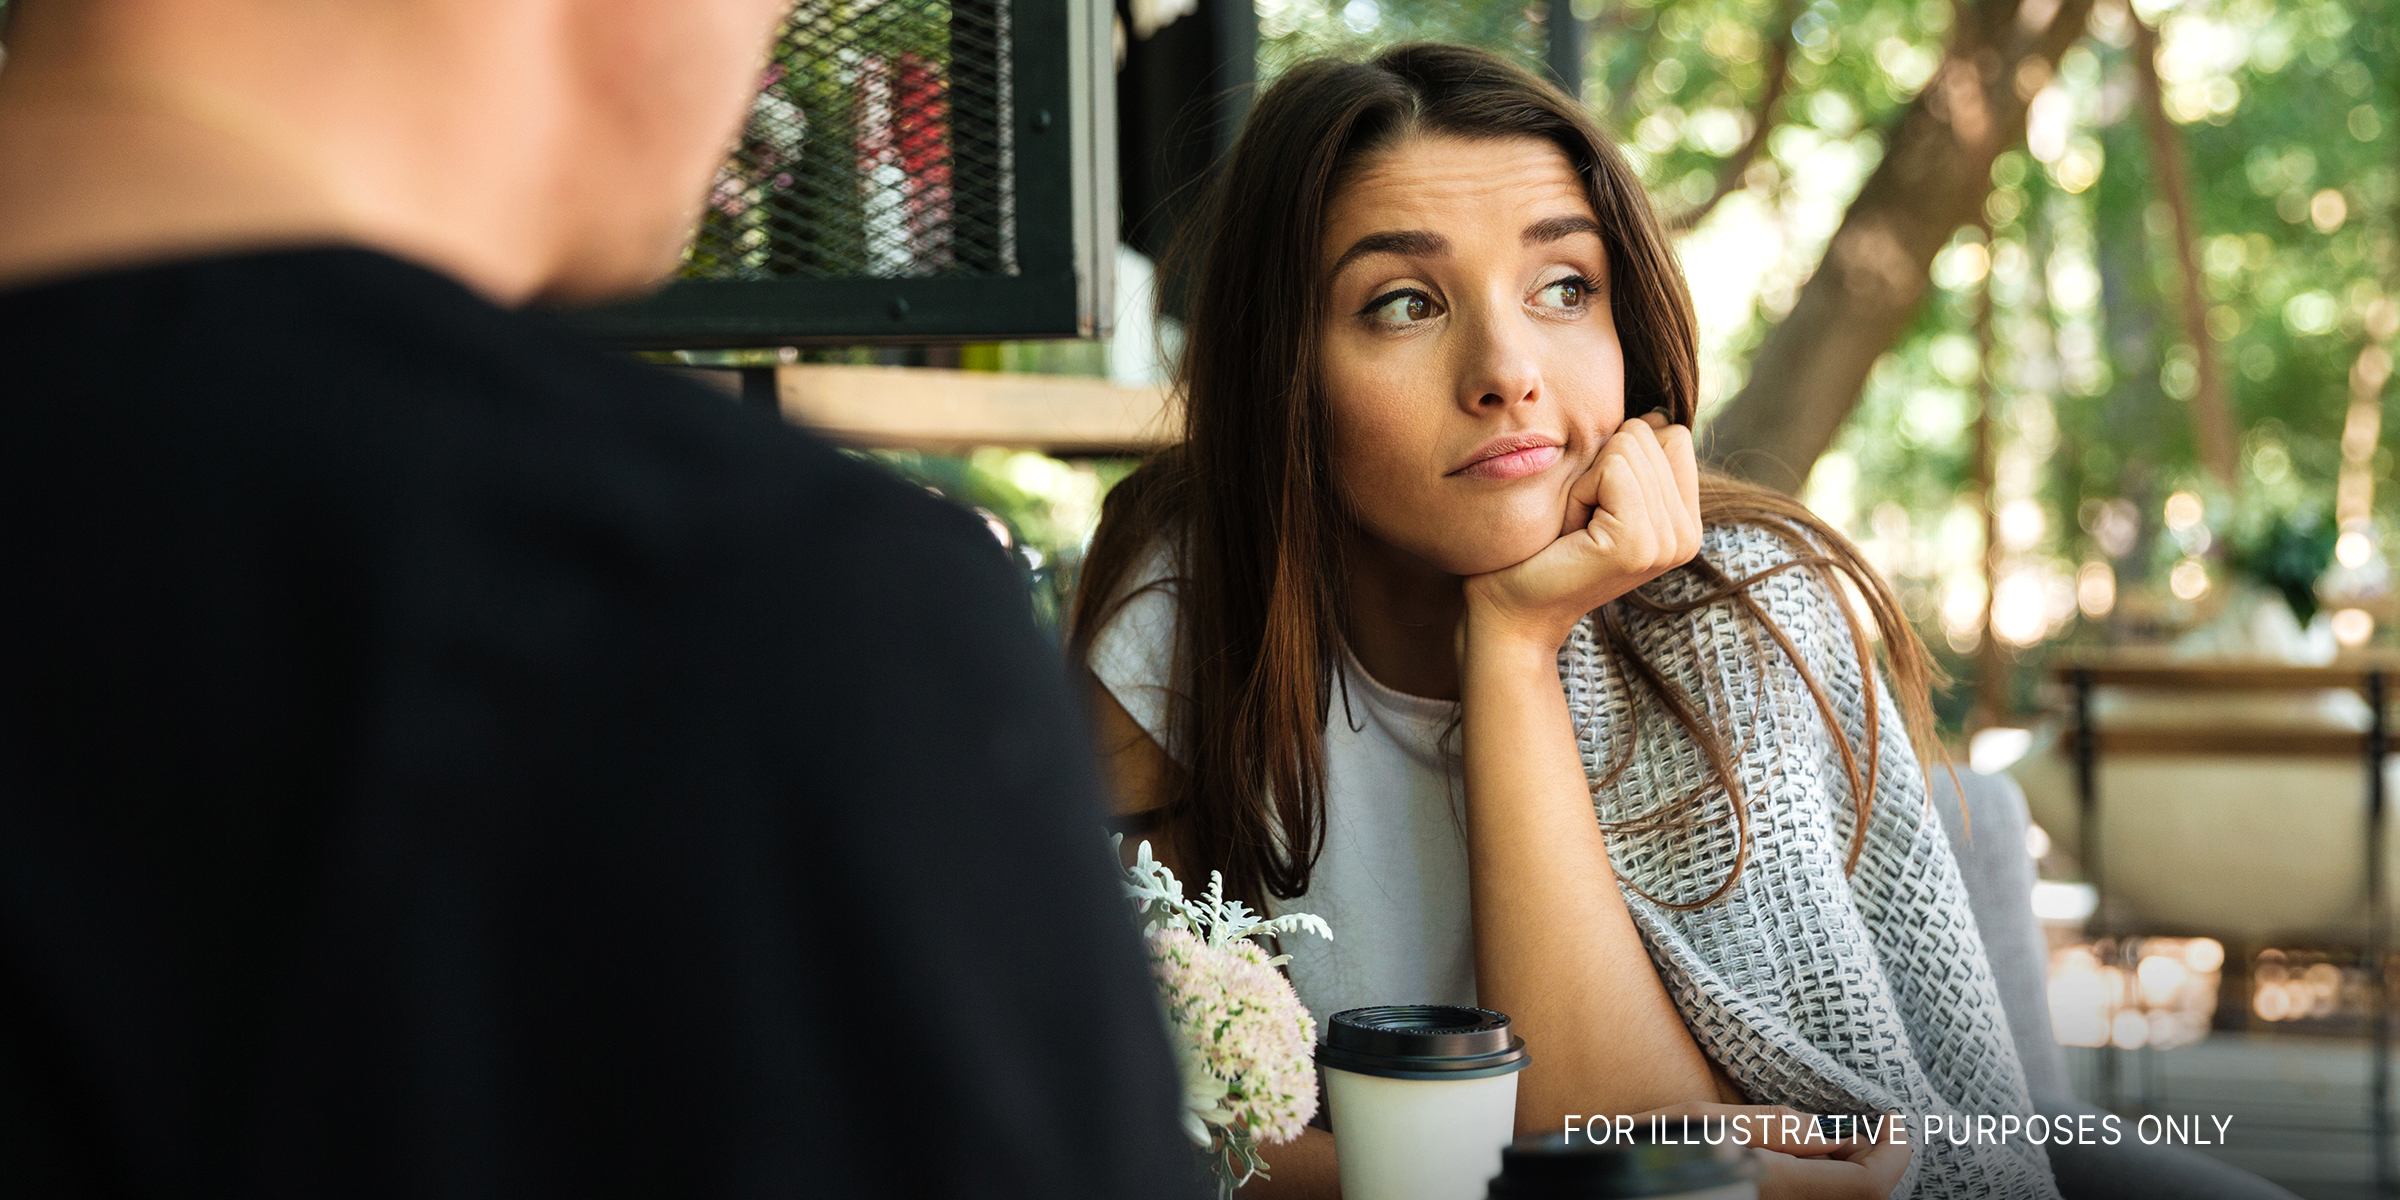 A woman bored during a date | Source: Shutterstock